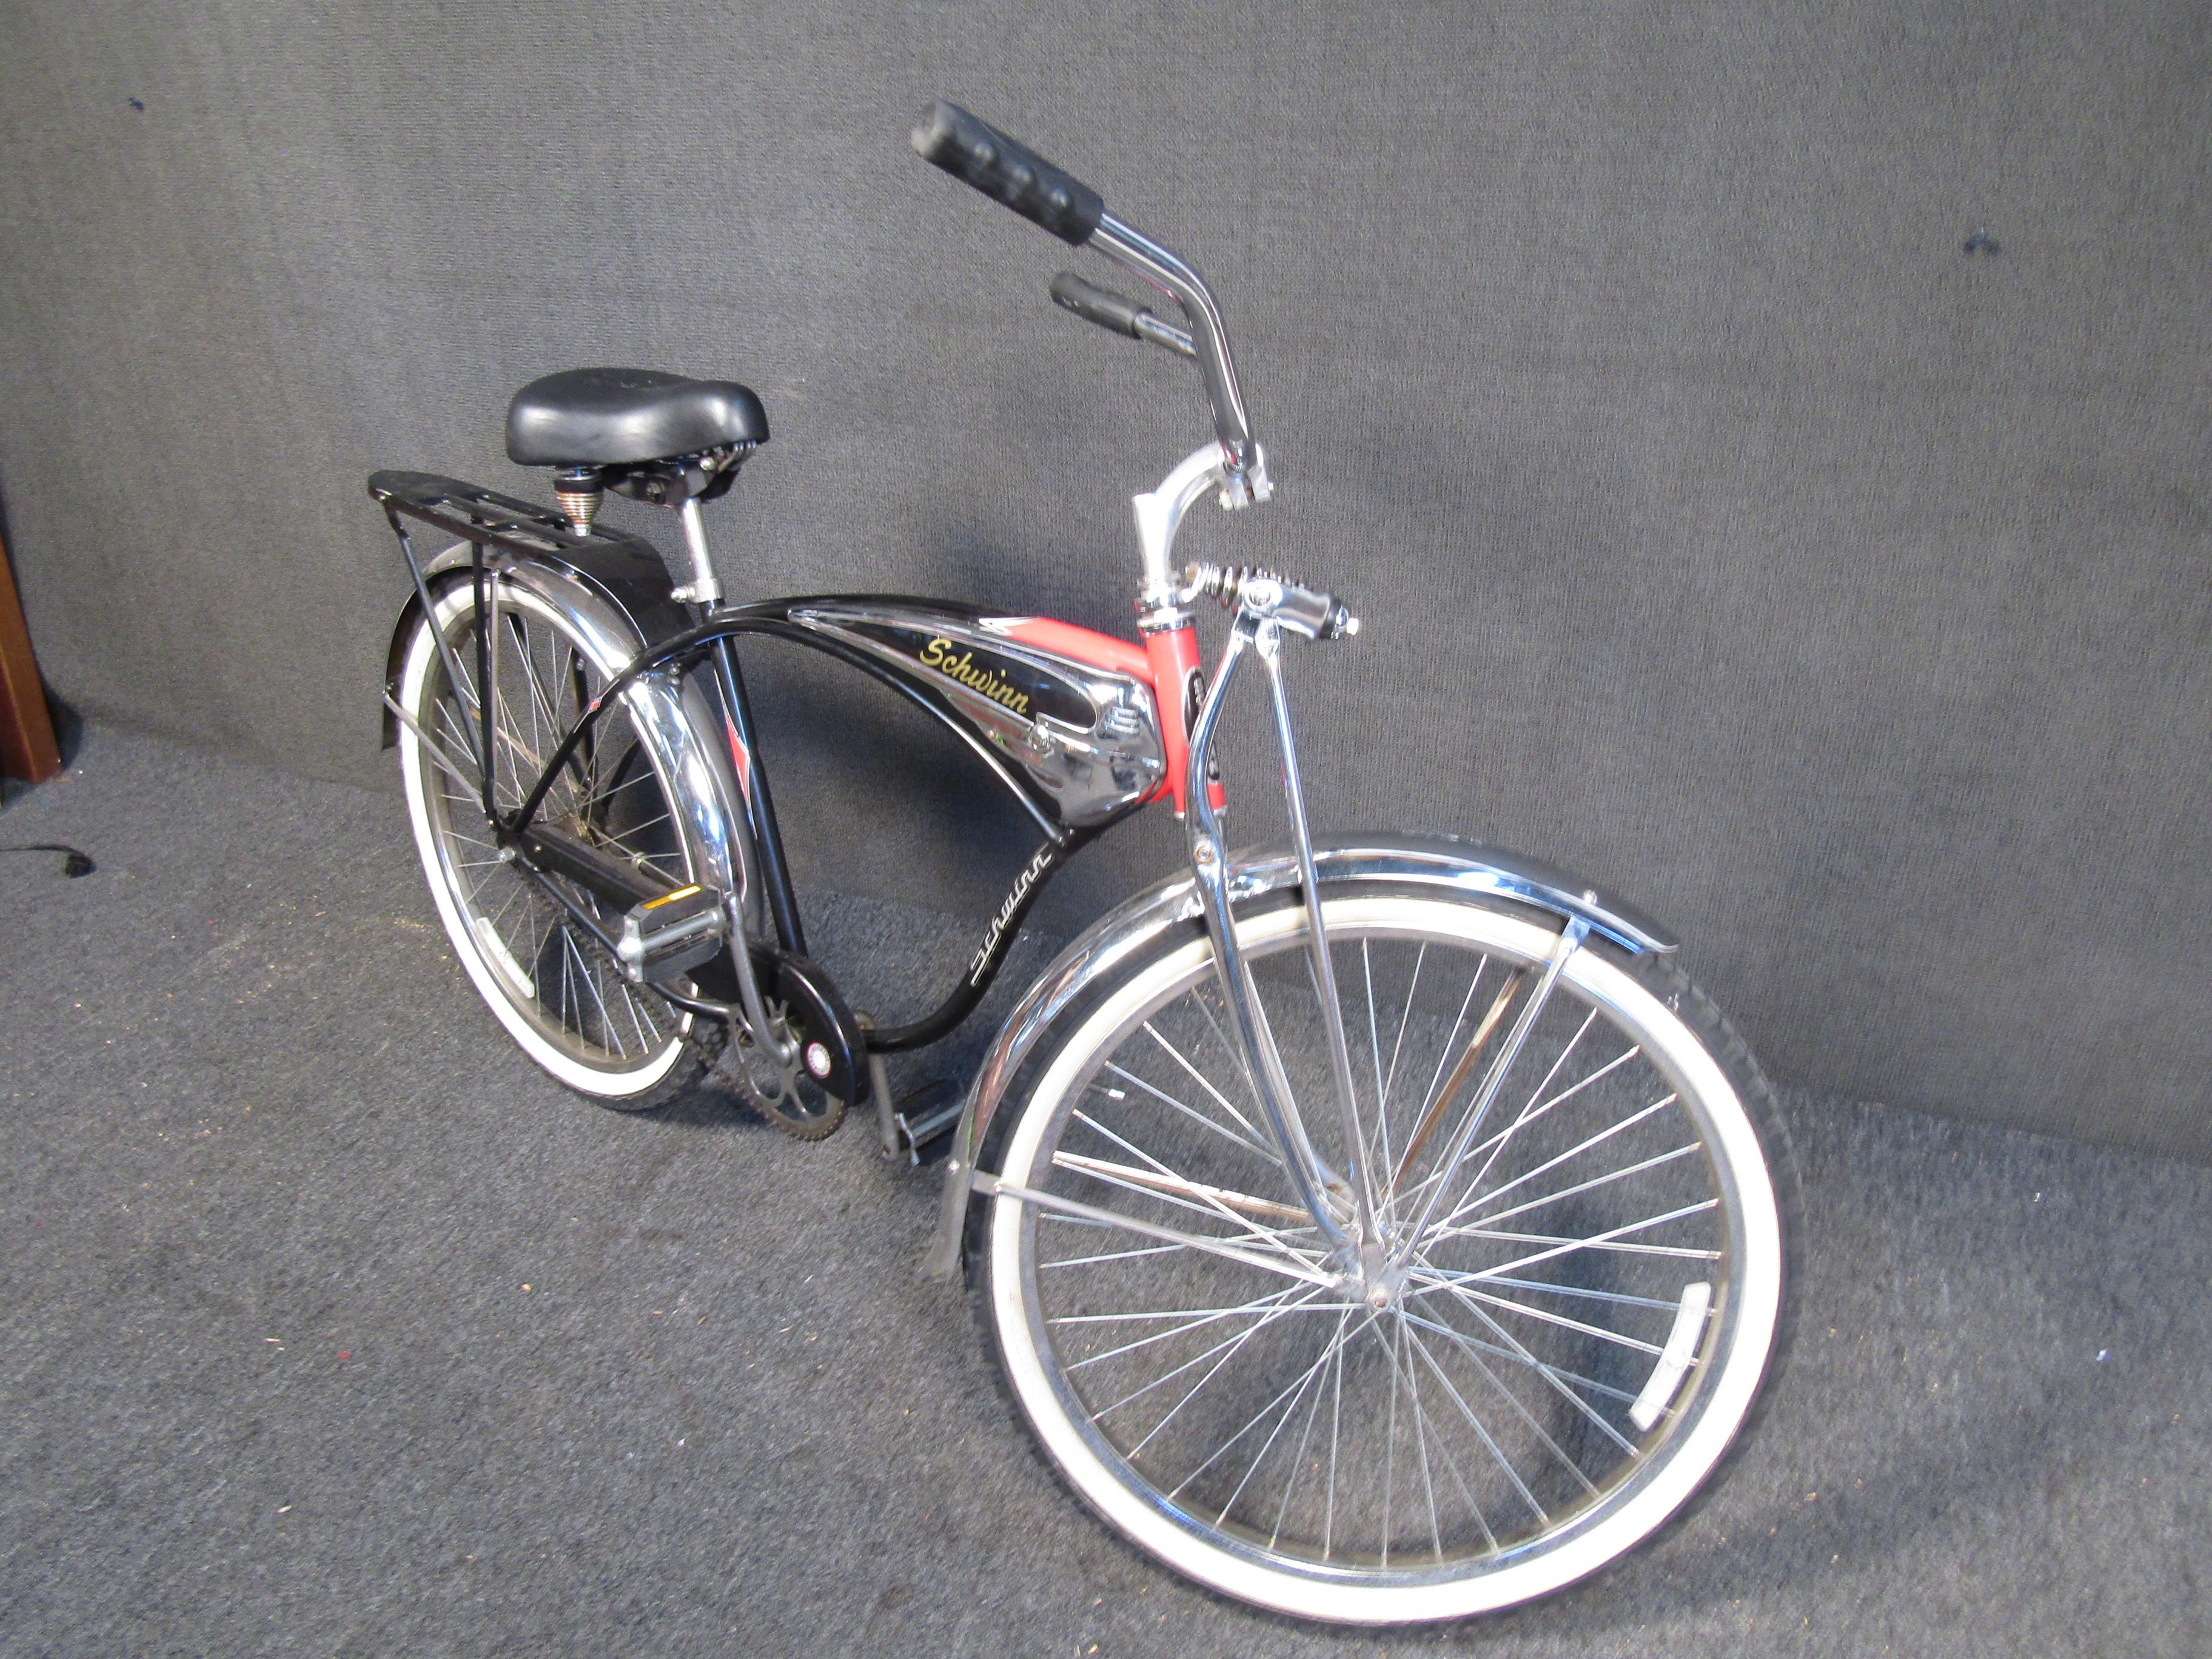 Built between 1949 and 1959, Schwinn Phantoms were the most bodacious, luxurious, and feature-filled bicycles on the road. There was the deluxe patented spring fork, built-in horn, streamlined tank, Schwinn fender lights and an automatic brake